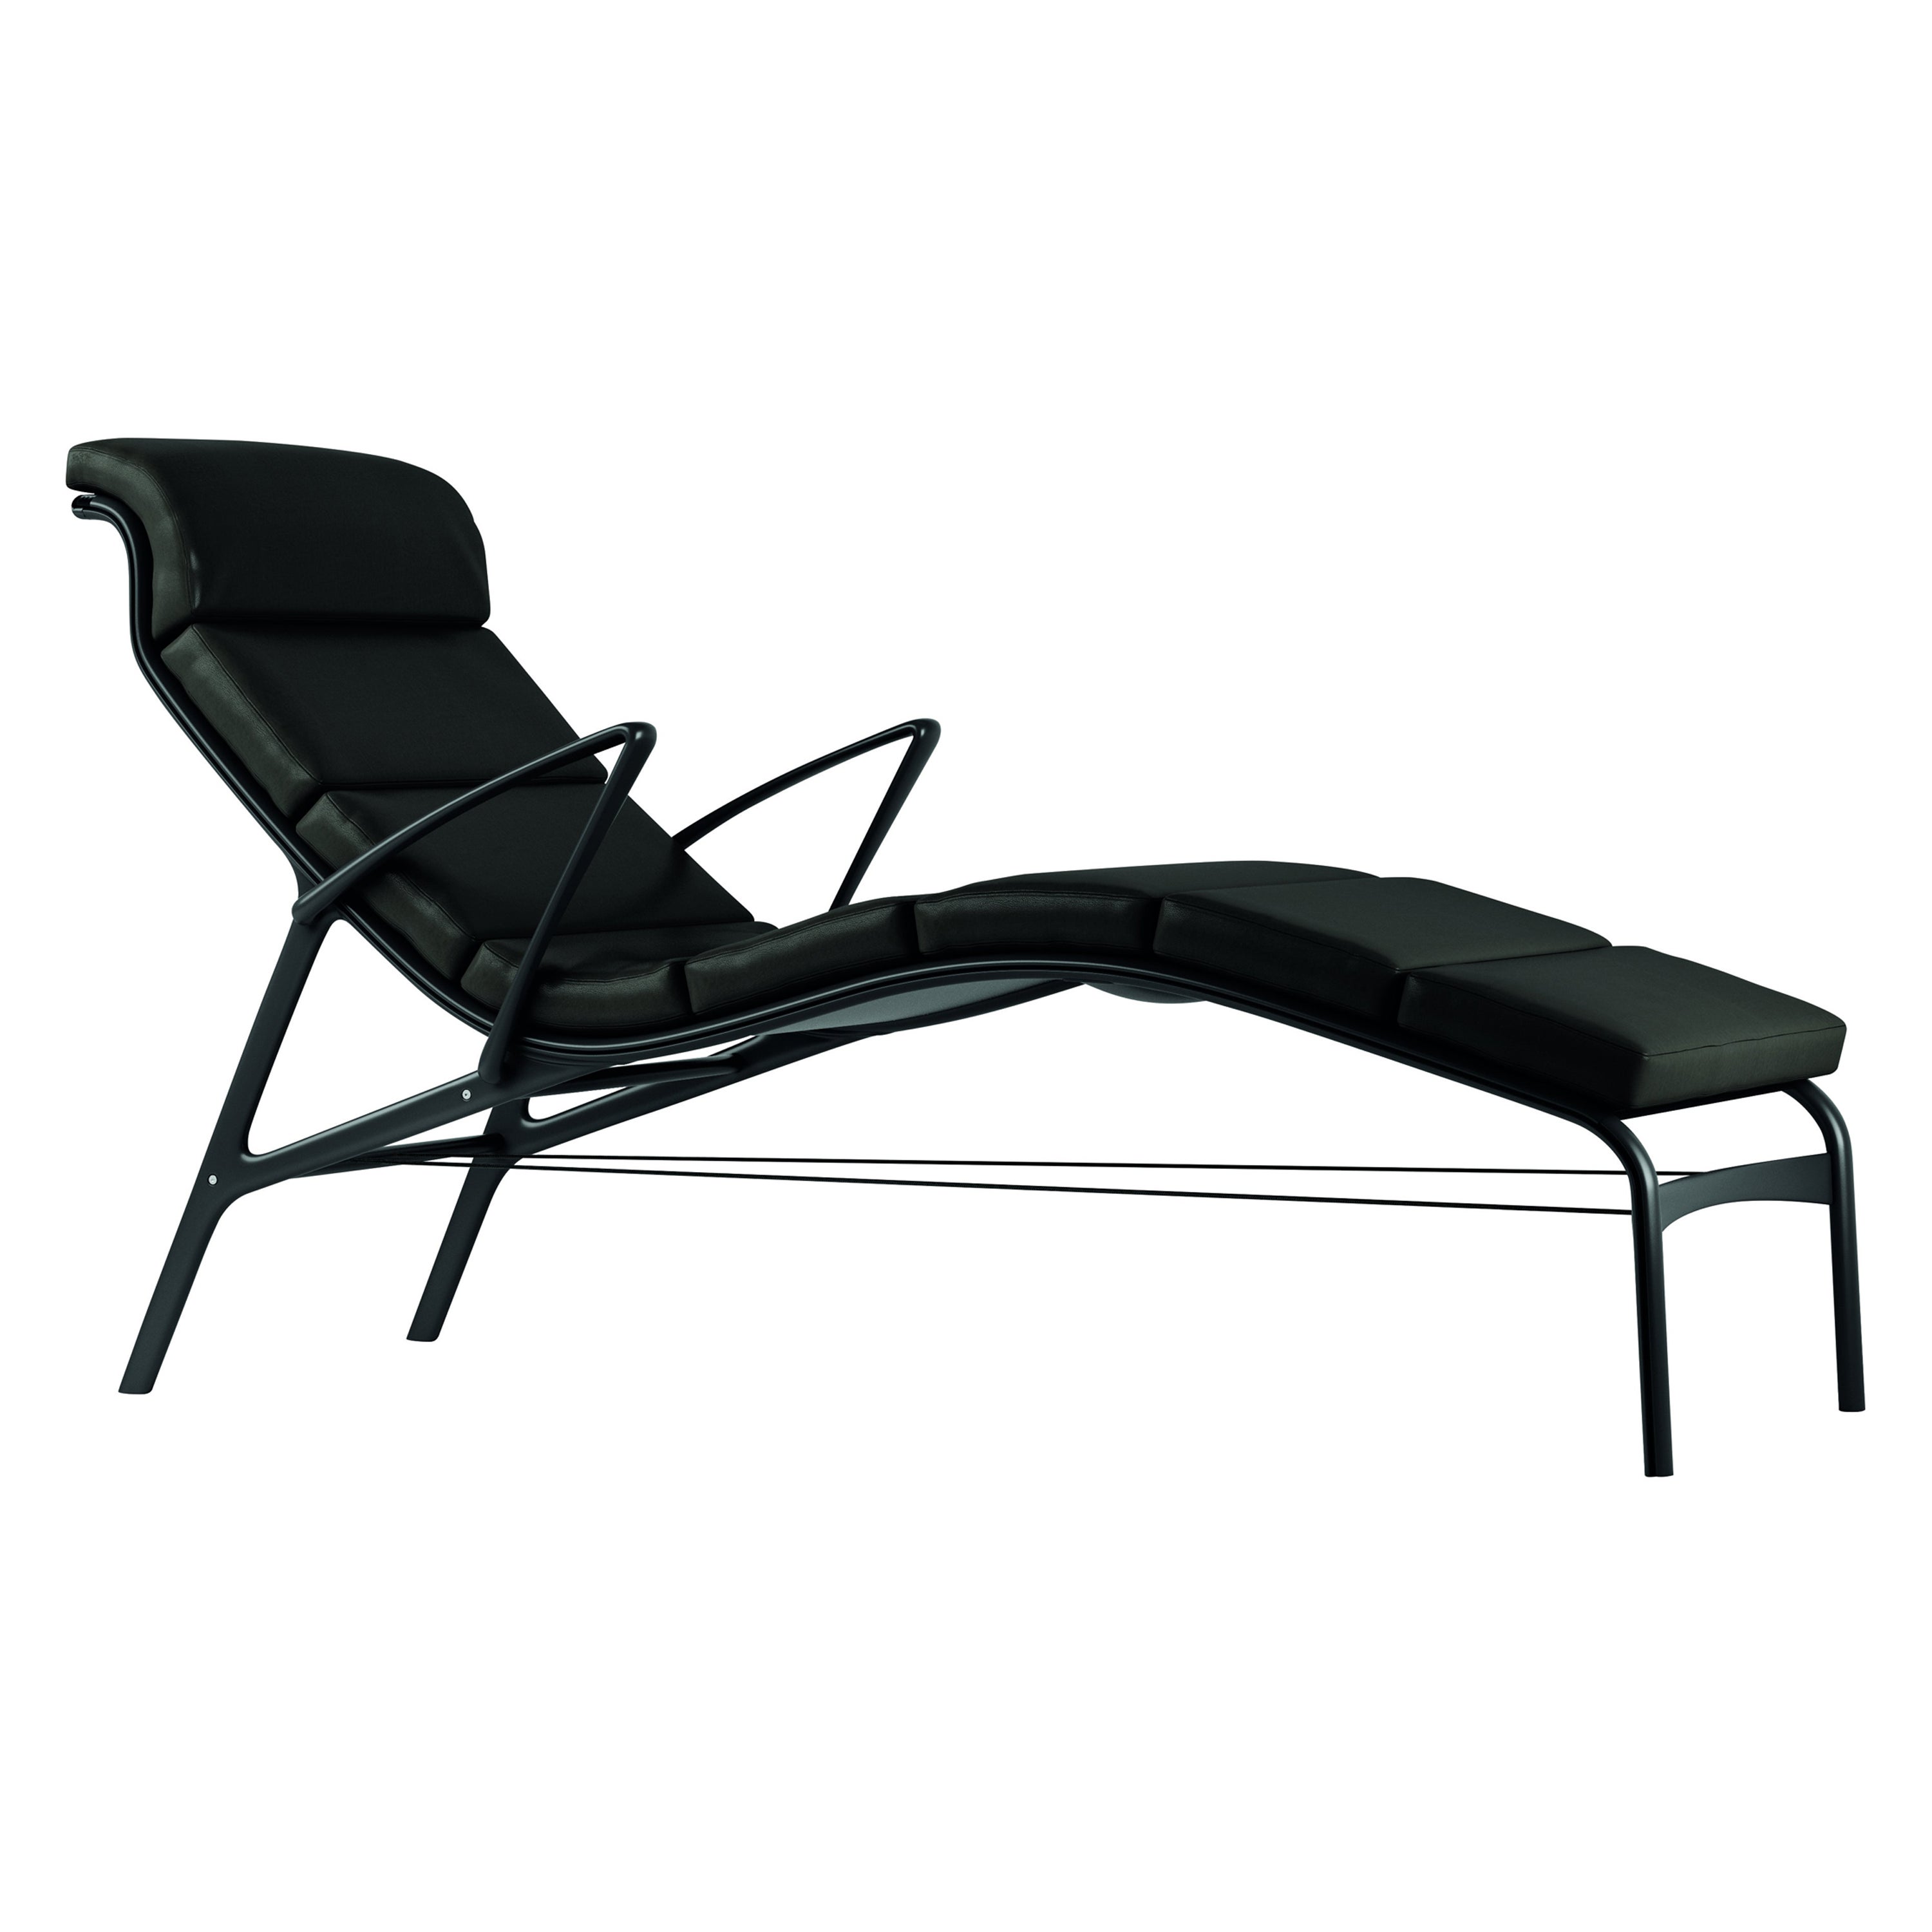 Alias 415 Longframe Soft Chair in Black Leather Seat & Lacquered Aluminum Frame For Sale